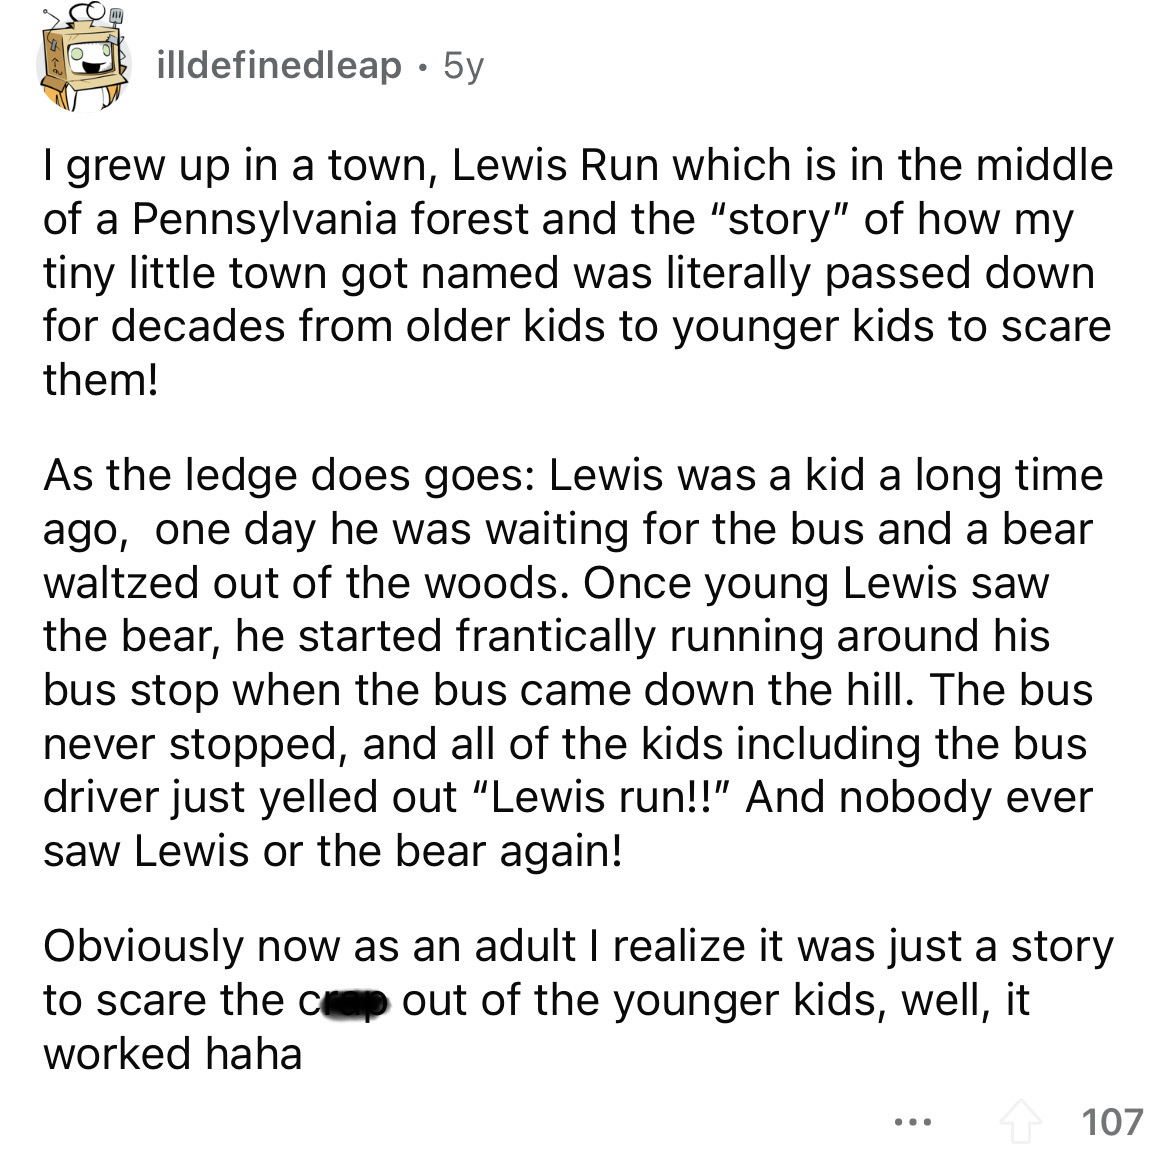 angle - illdefinedleap 5y I grew up in a town, Lewis Run which is in the middle of a Pennsylvania forest and the "story" of how my tiny little town got named was literally passed down for decades from older kids to younger kids to scare them! As the ledge